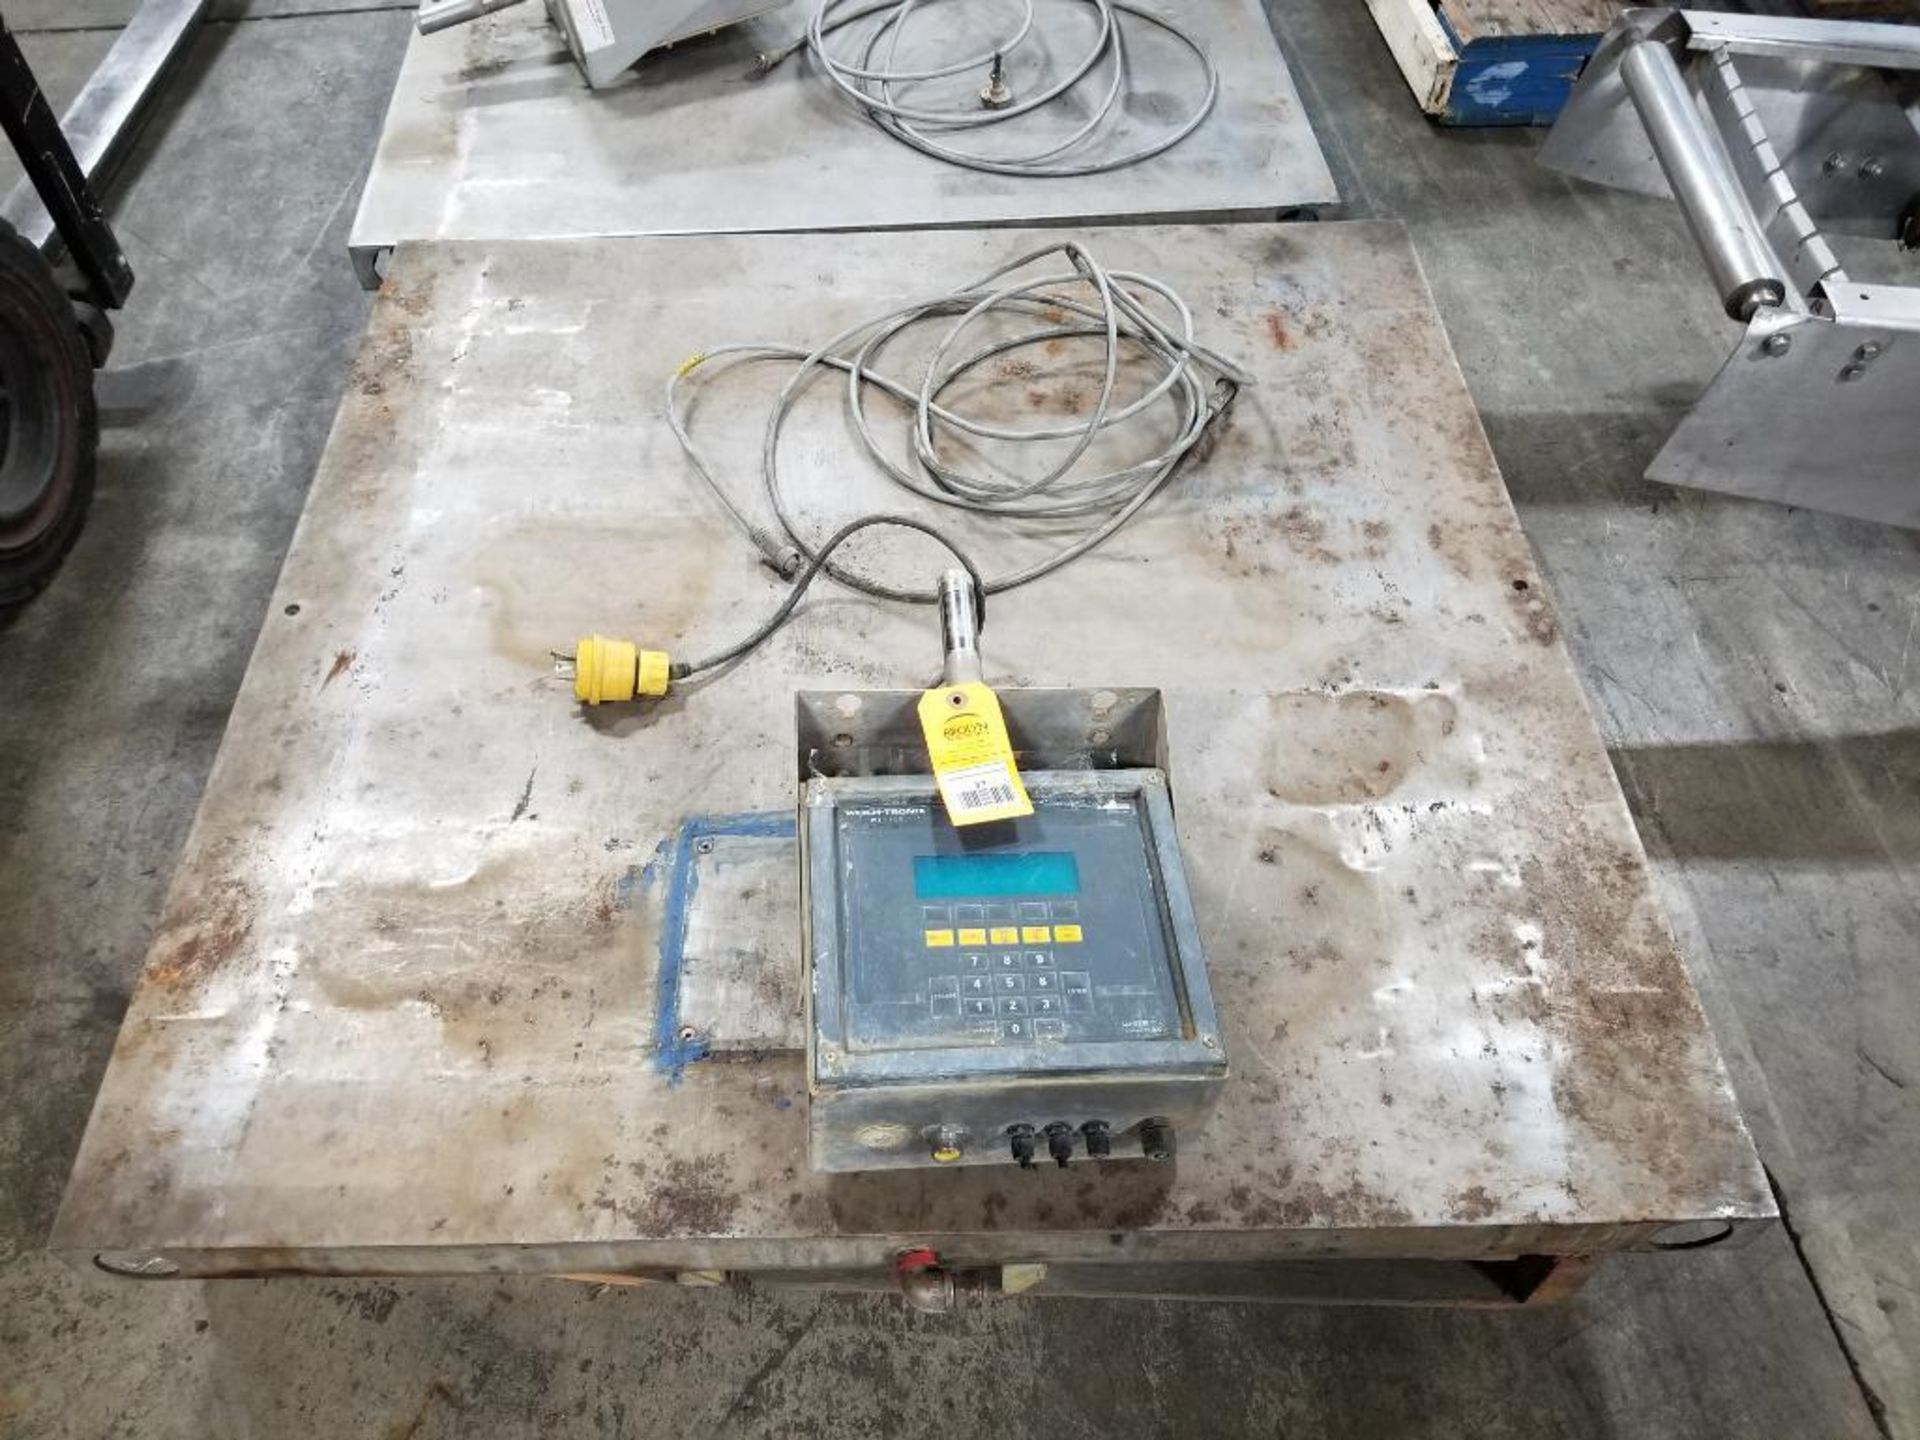 5000lb Weightronix platform scale. 48" x 48". 115v single phase. Tested and functional as pictured.